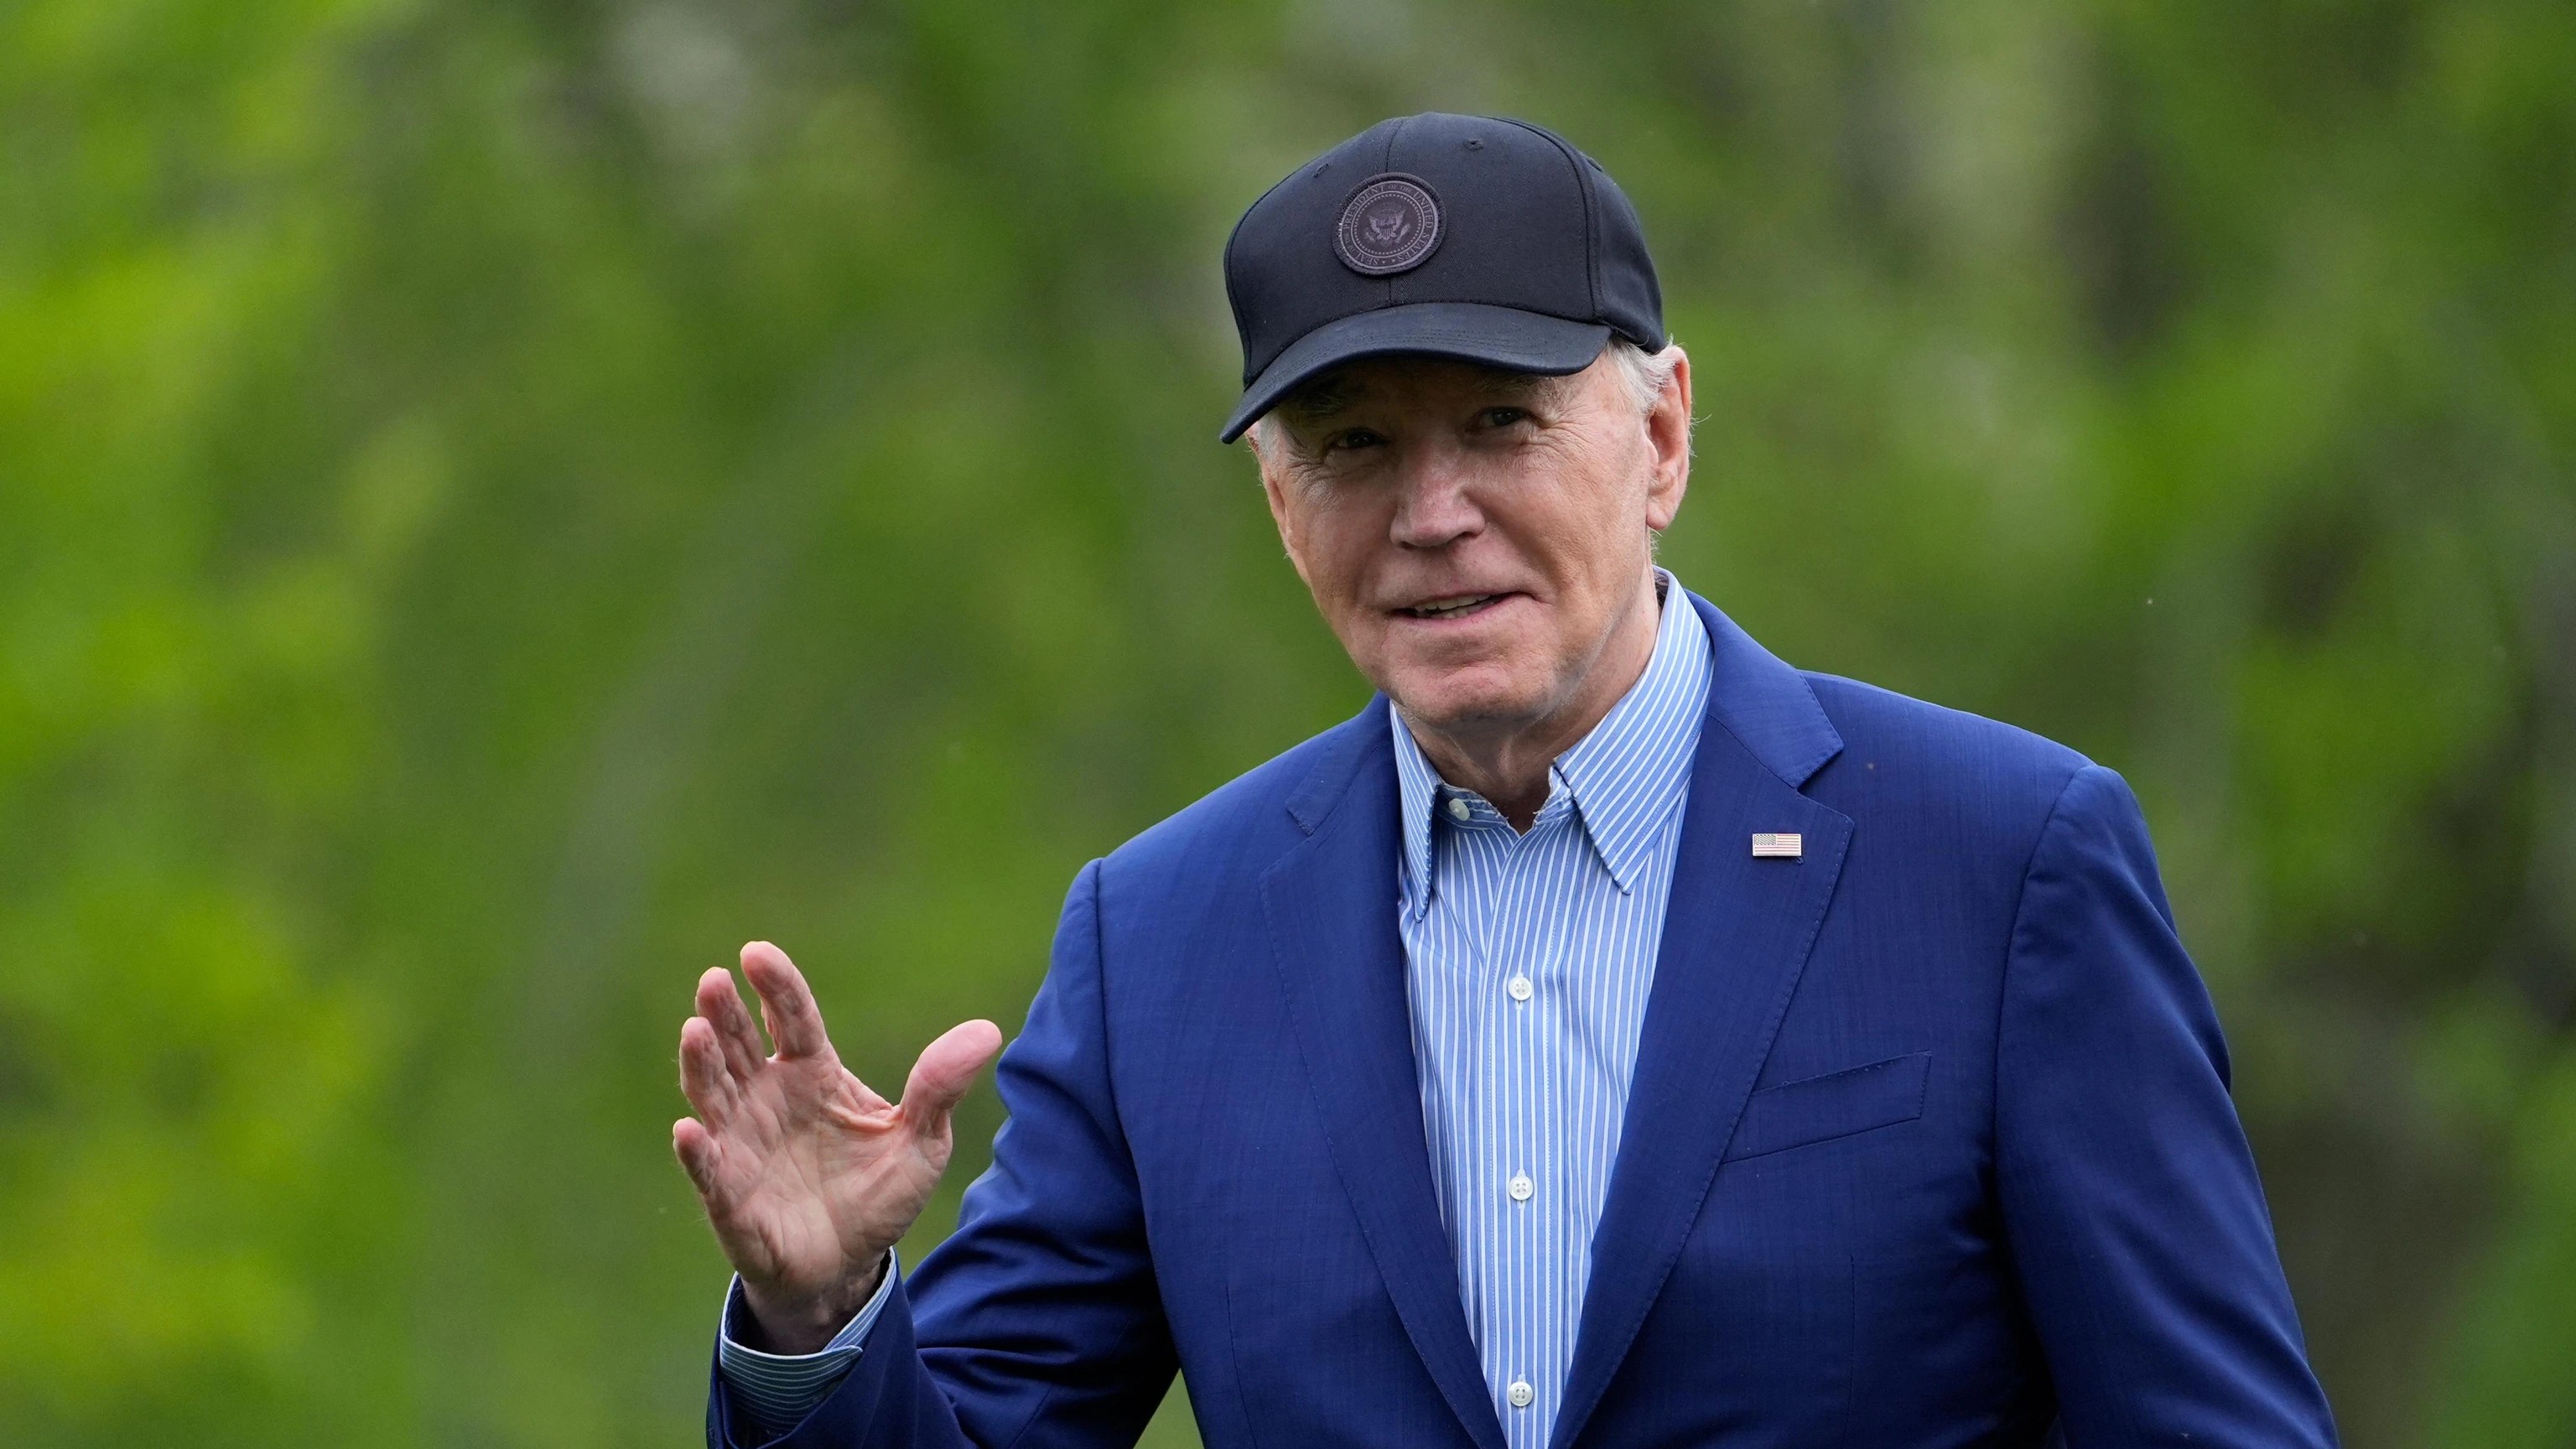 Biden scores endorsements from Kennedy family, looking to shore up support against Trump and RFK Jr.